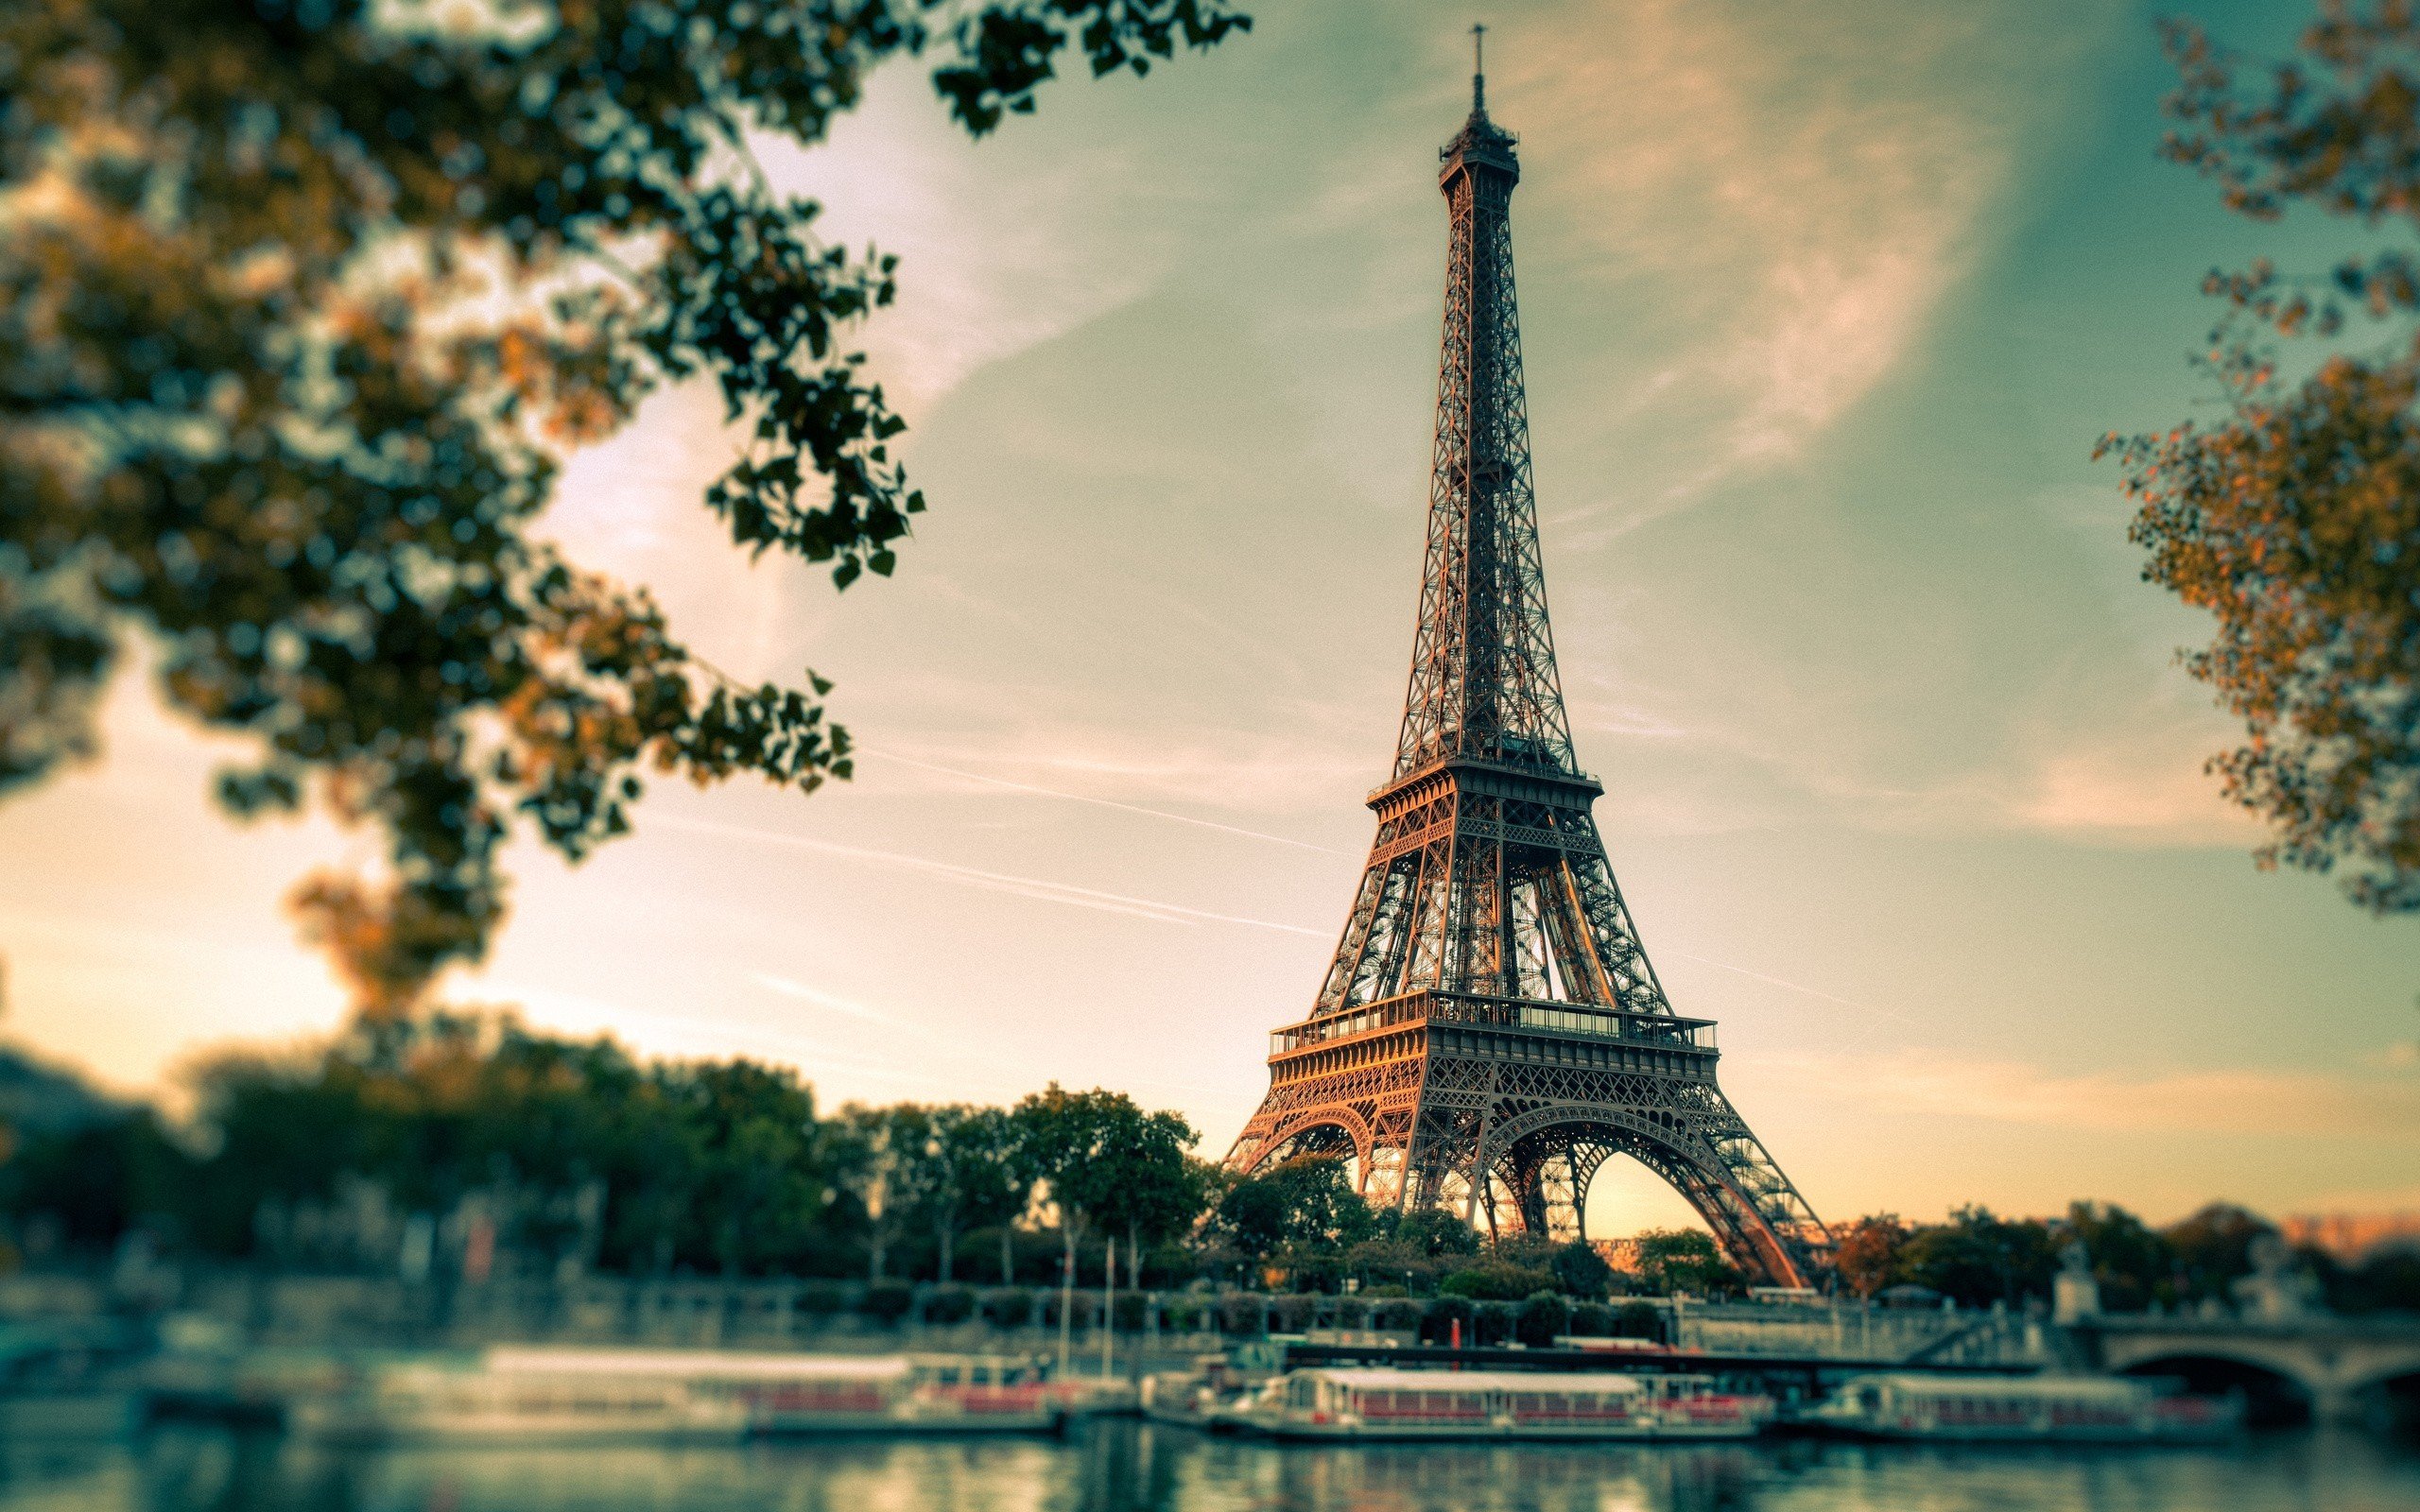 Eiffel Tower, Blurred, Paris, France, Filter, Boat, Trees, Branch, Architecture, Tower Wallpaper